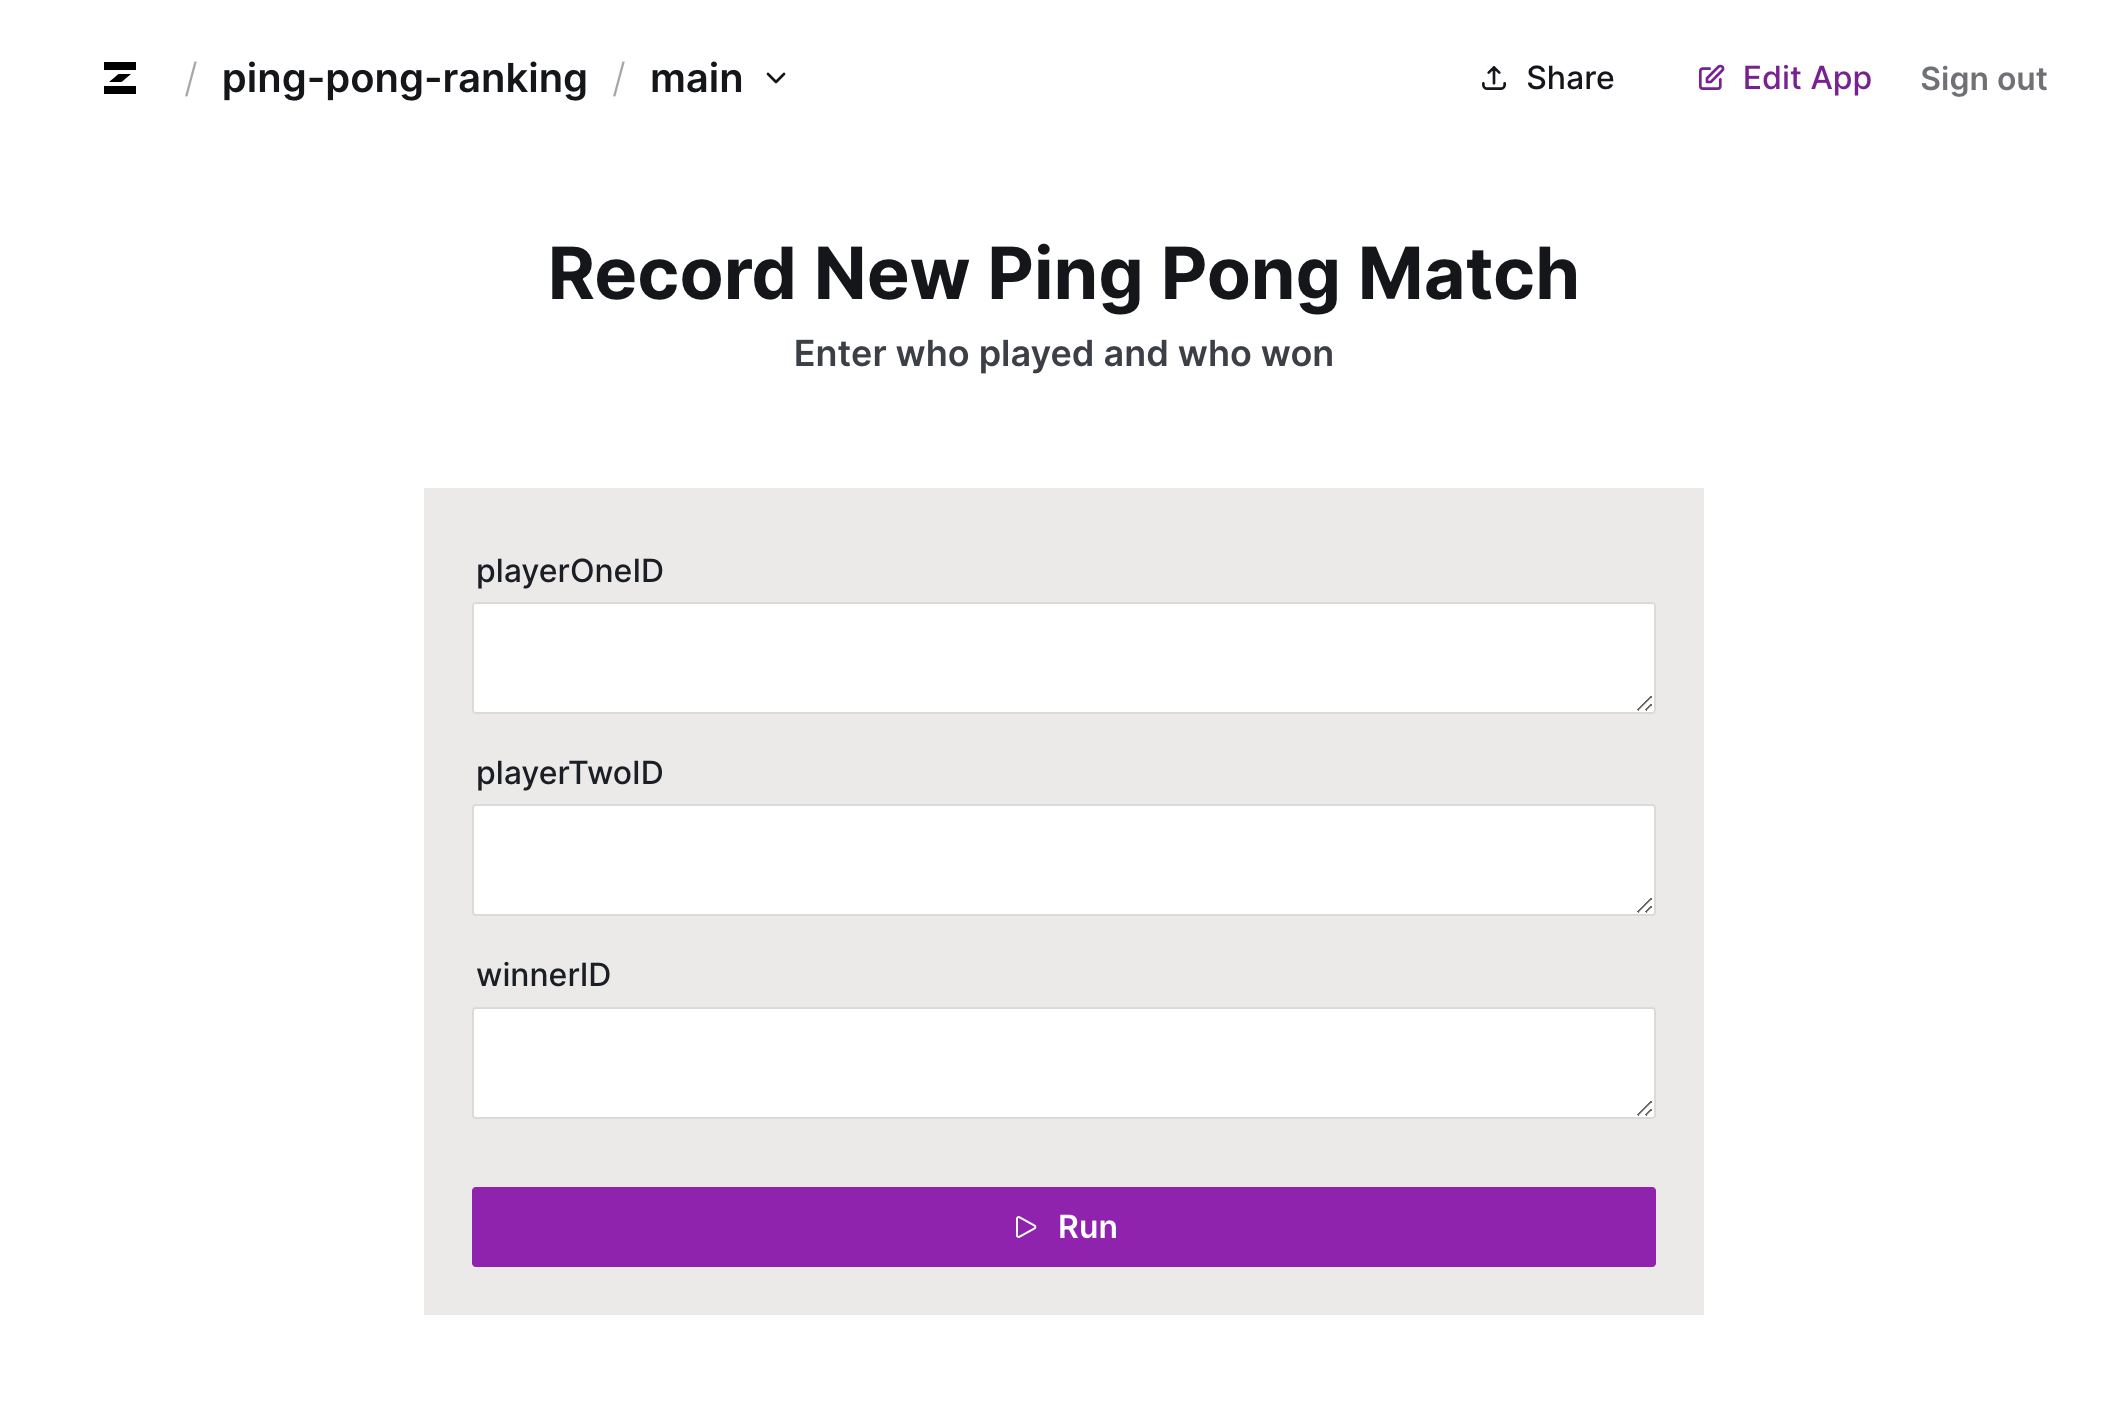 Ping pong ranking app — Record a new match page